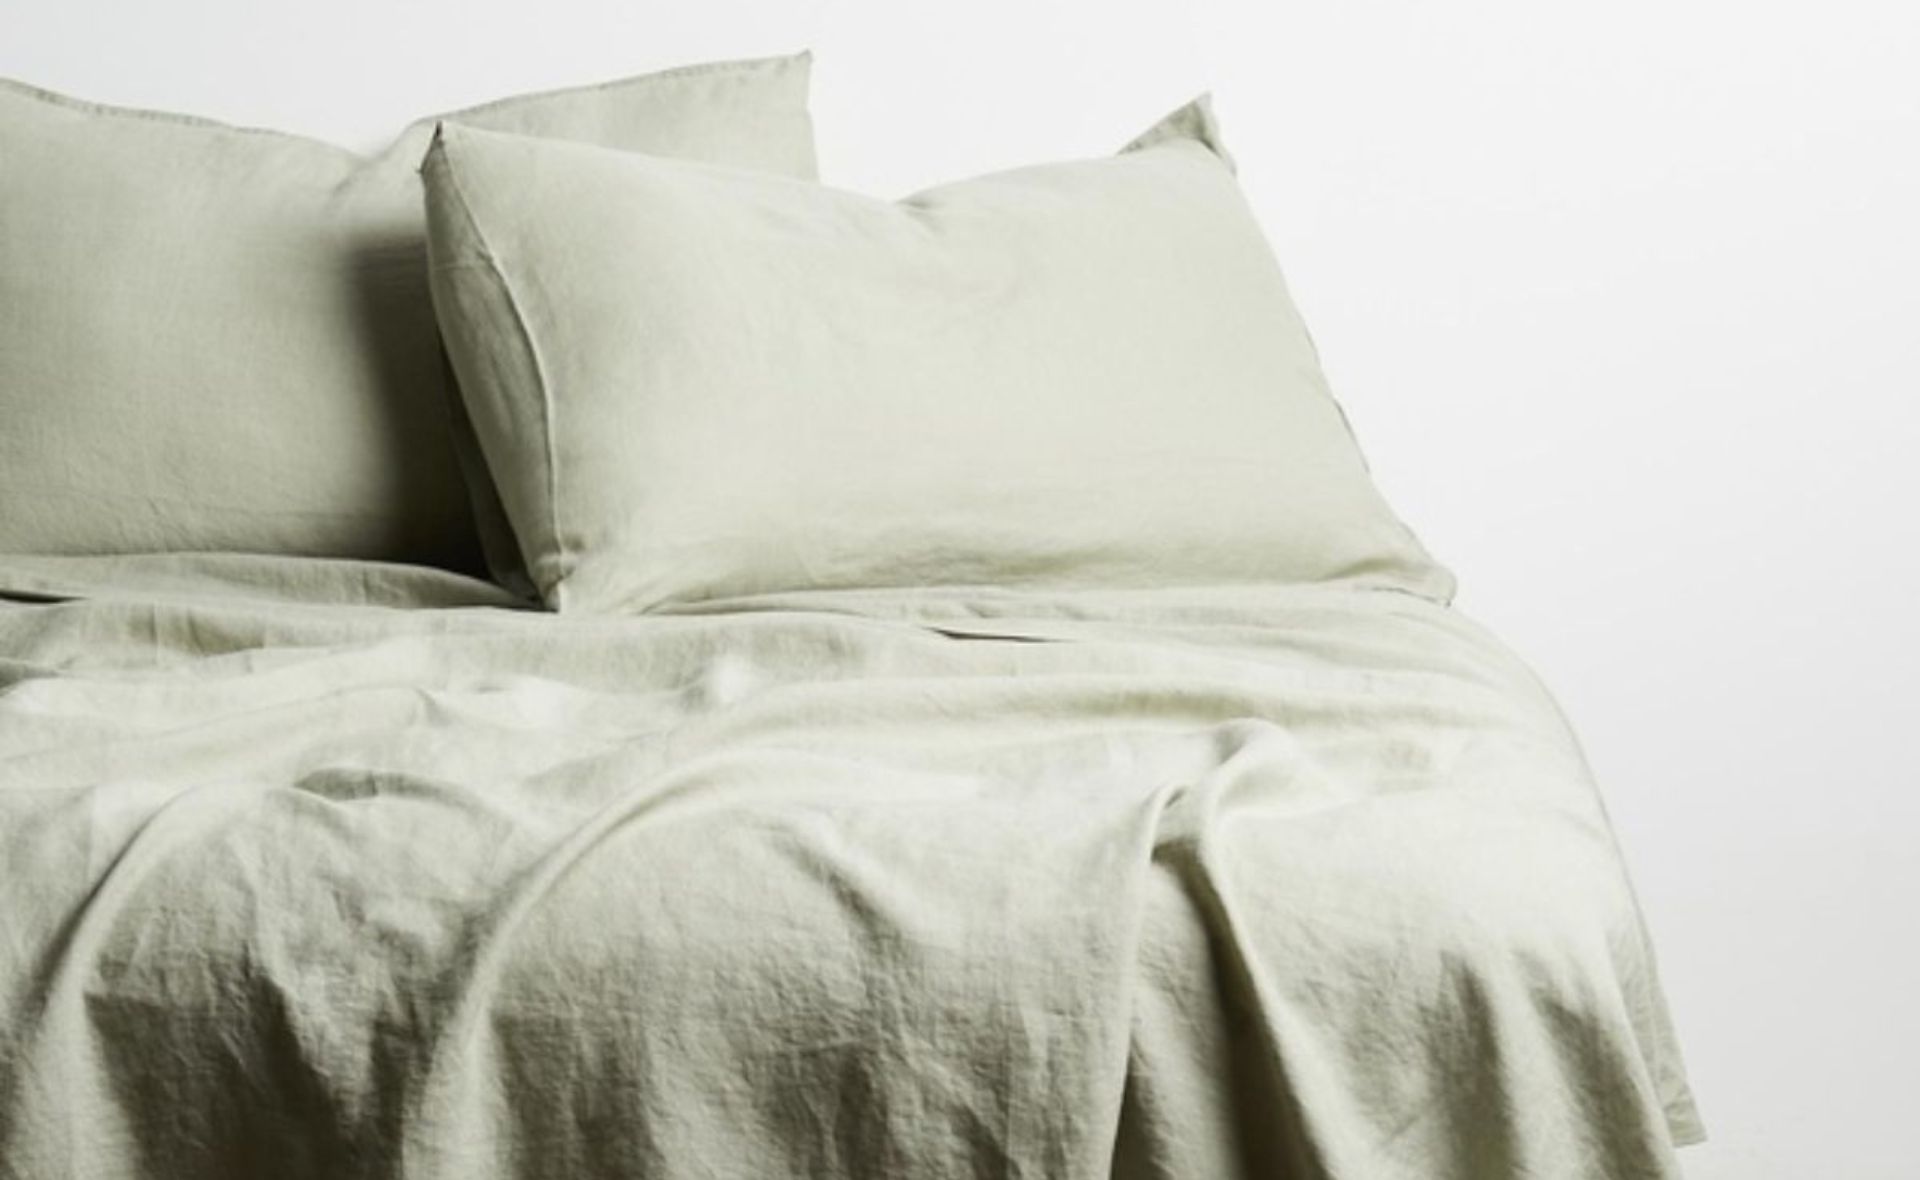 Get your beauty sleep with the ultimate cooling sheets for an Aussie summer